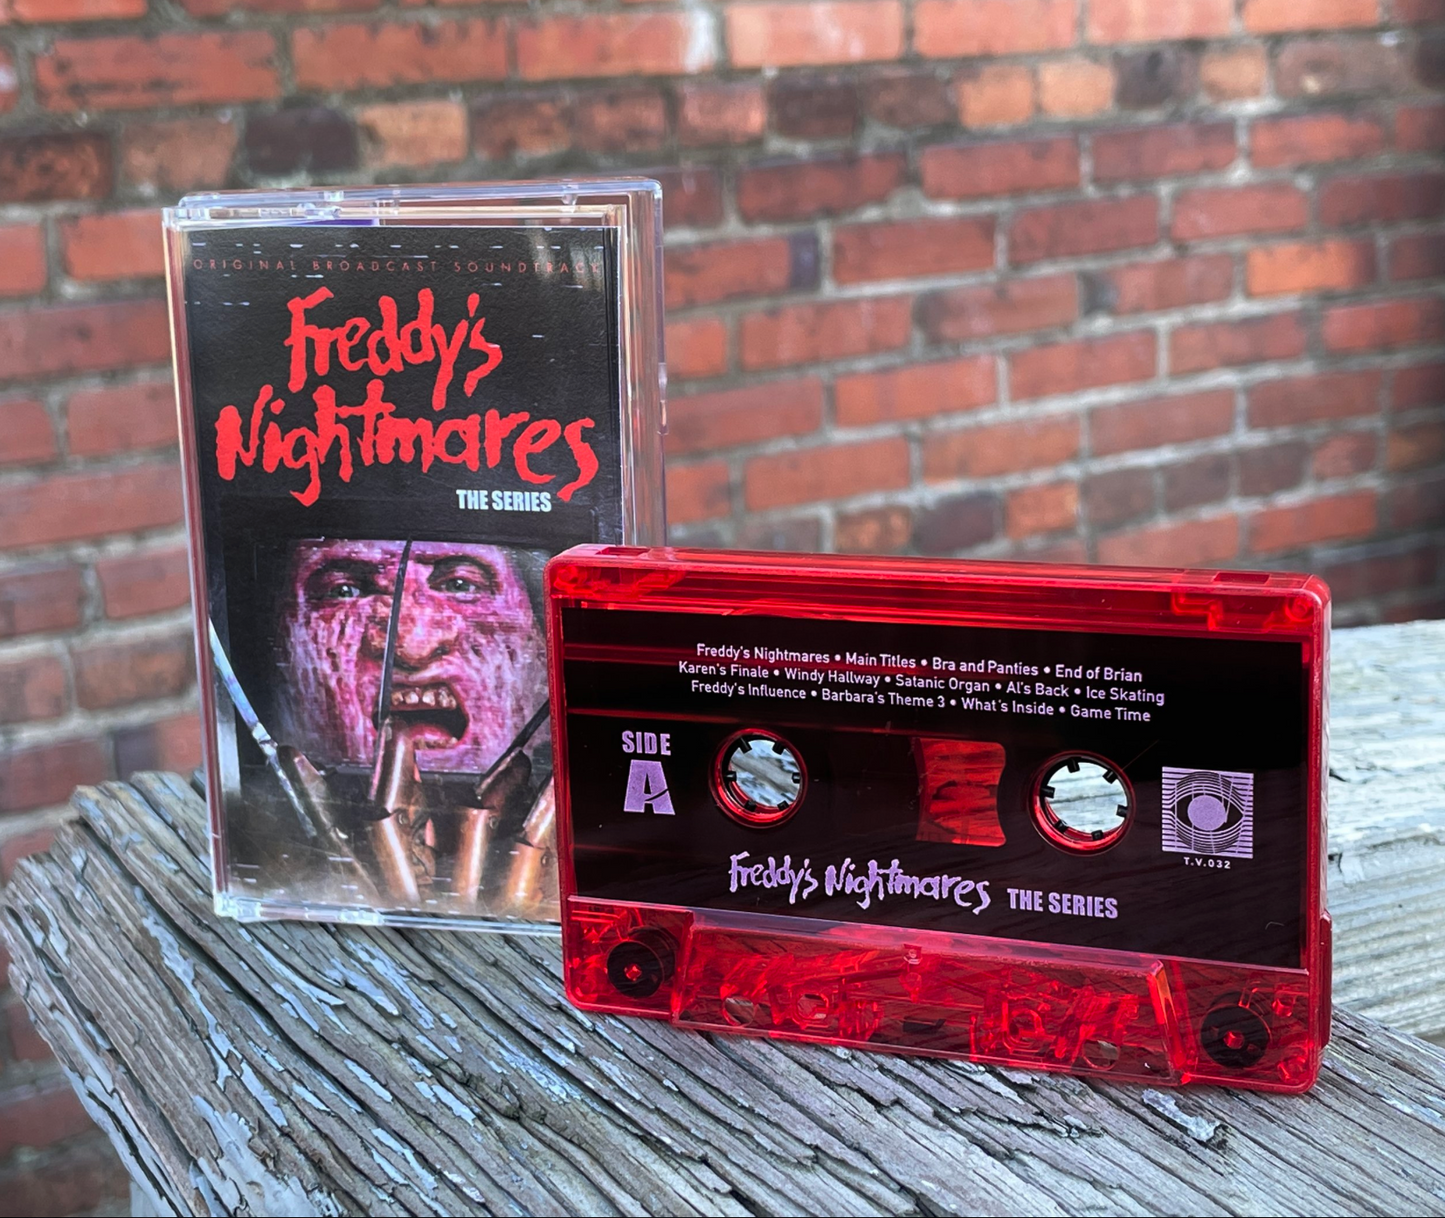 TV032: Freddy's Nightmares The Series OST cassette